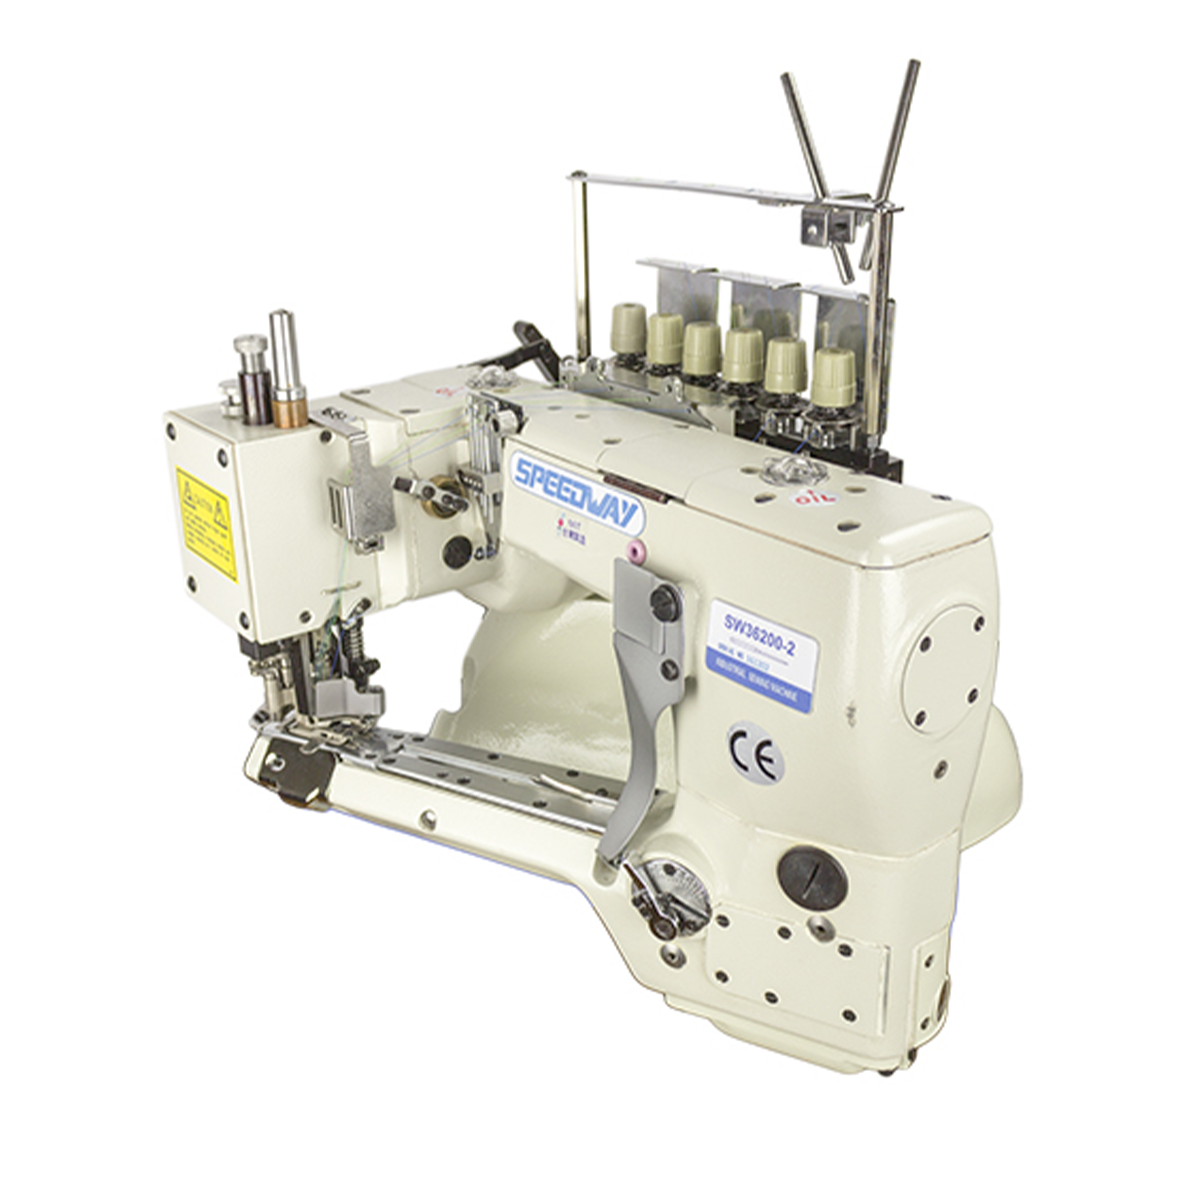 SPEEDWAY SW36200-2 4 Needle Feed of the Arm 6 Thread Flatseamer Assembled with Servo Motor, Table and Stand Included